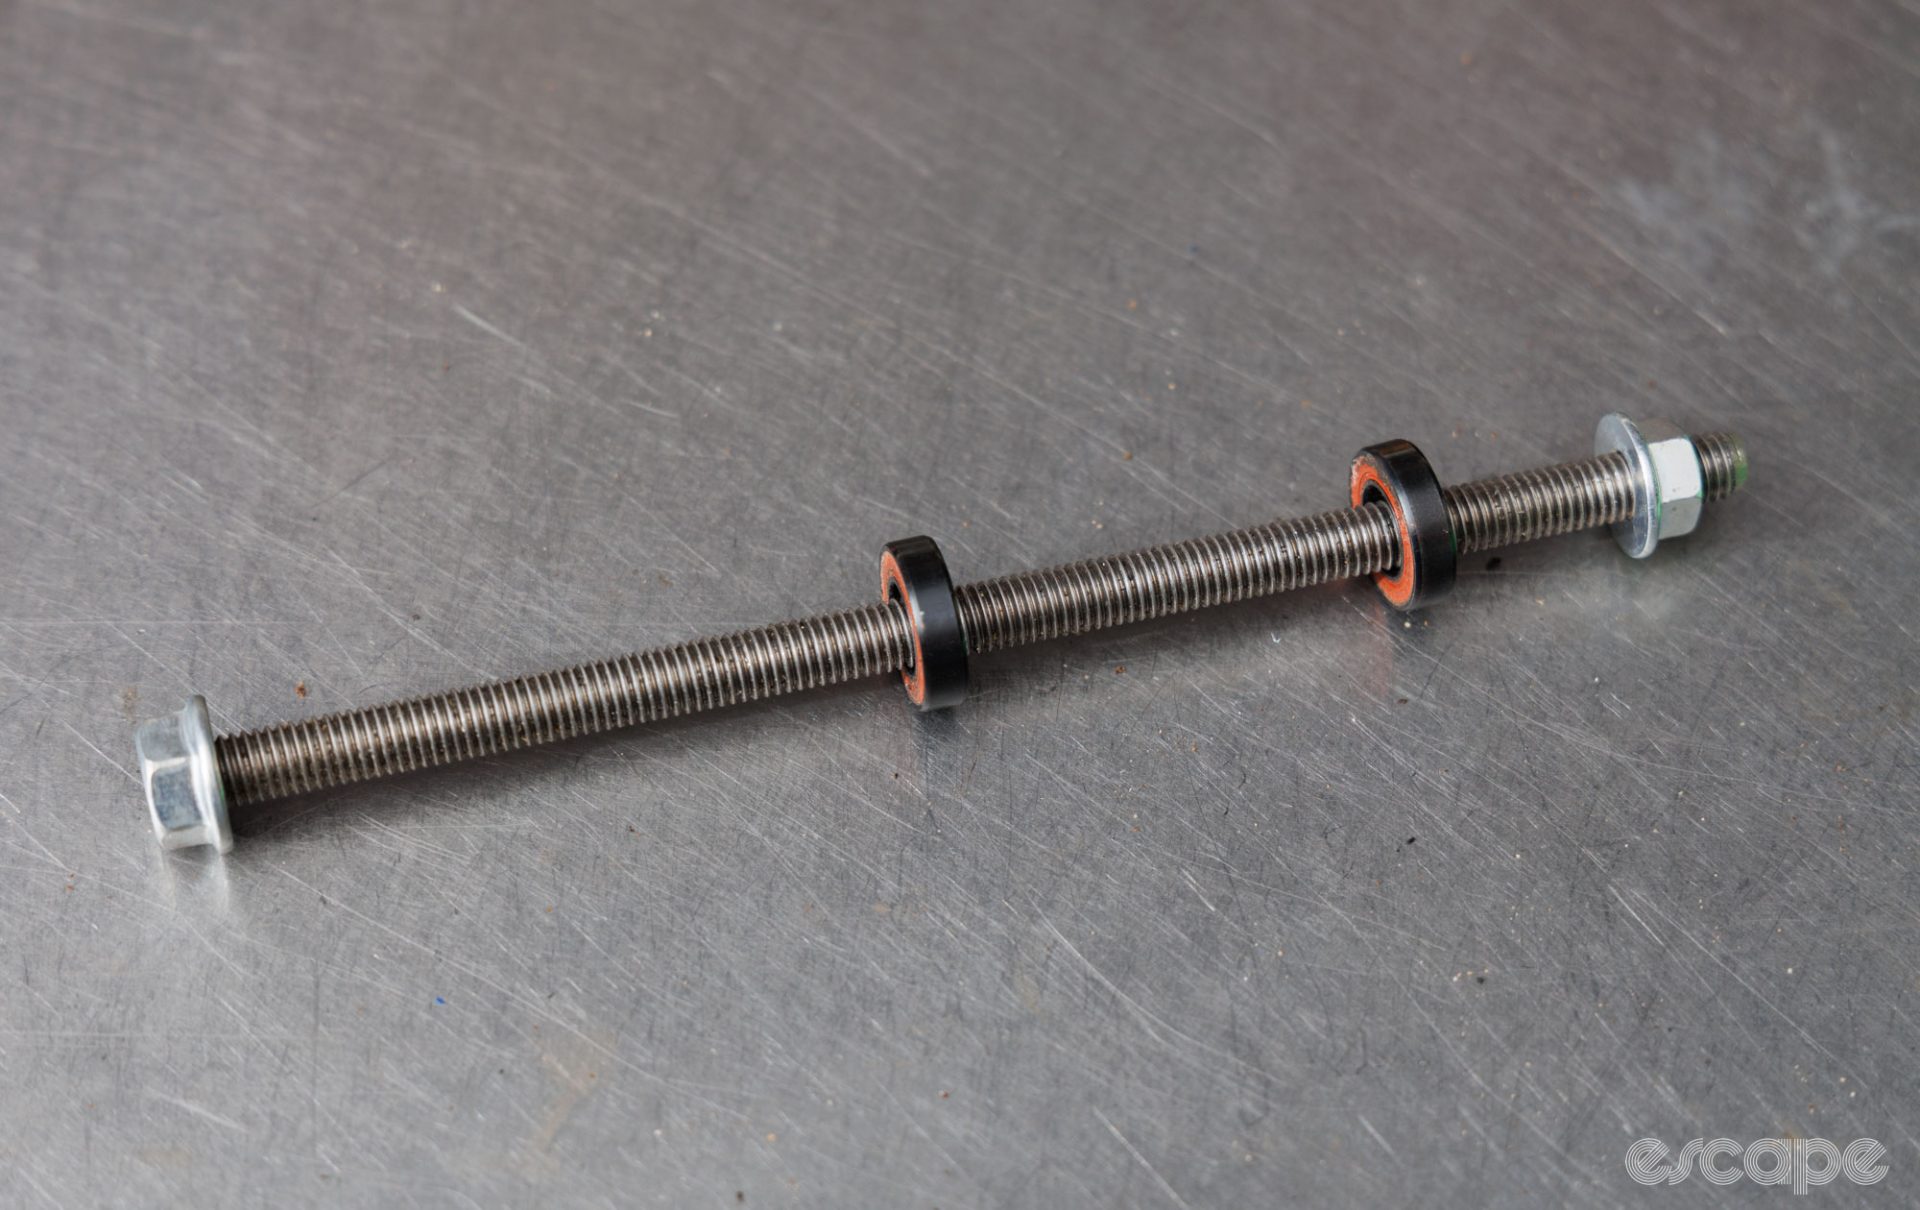 A basic threaded rod, threaded nuts, and some bearings sit on a bench. 